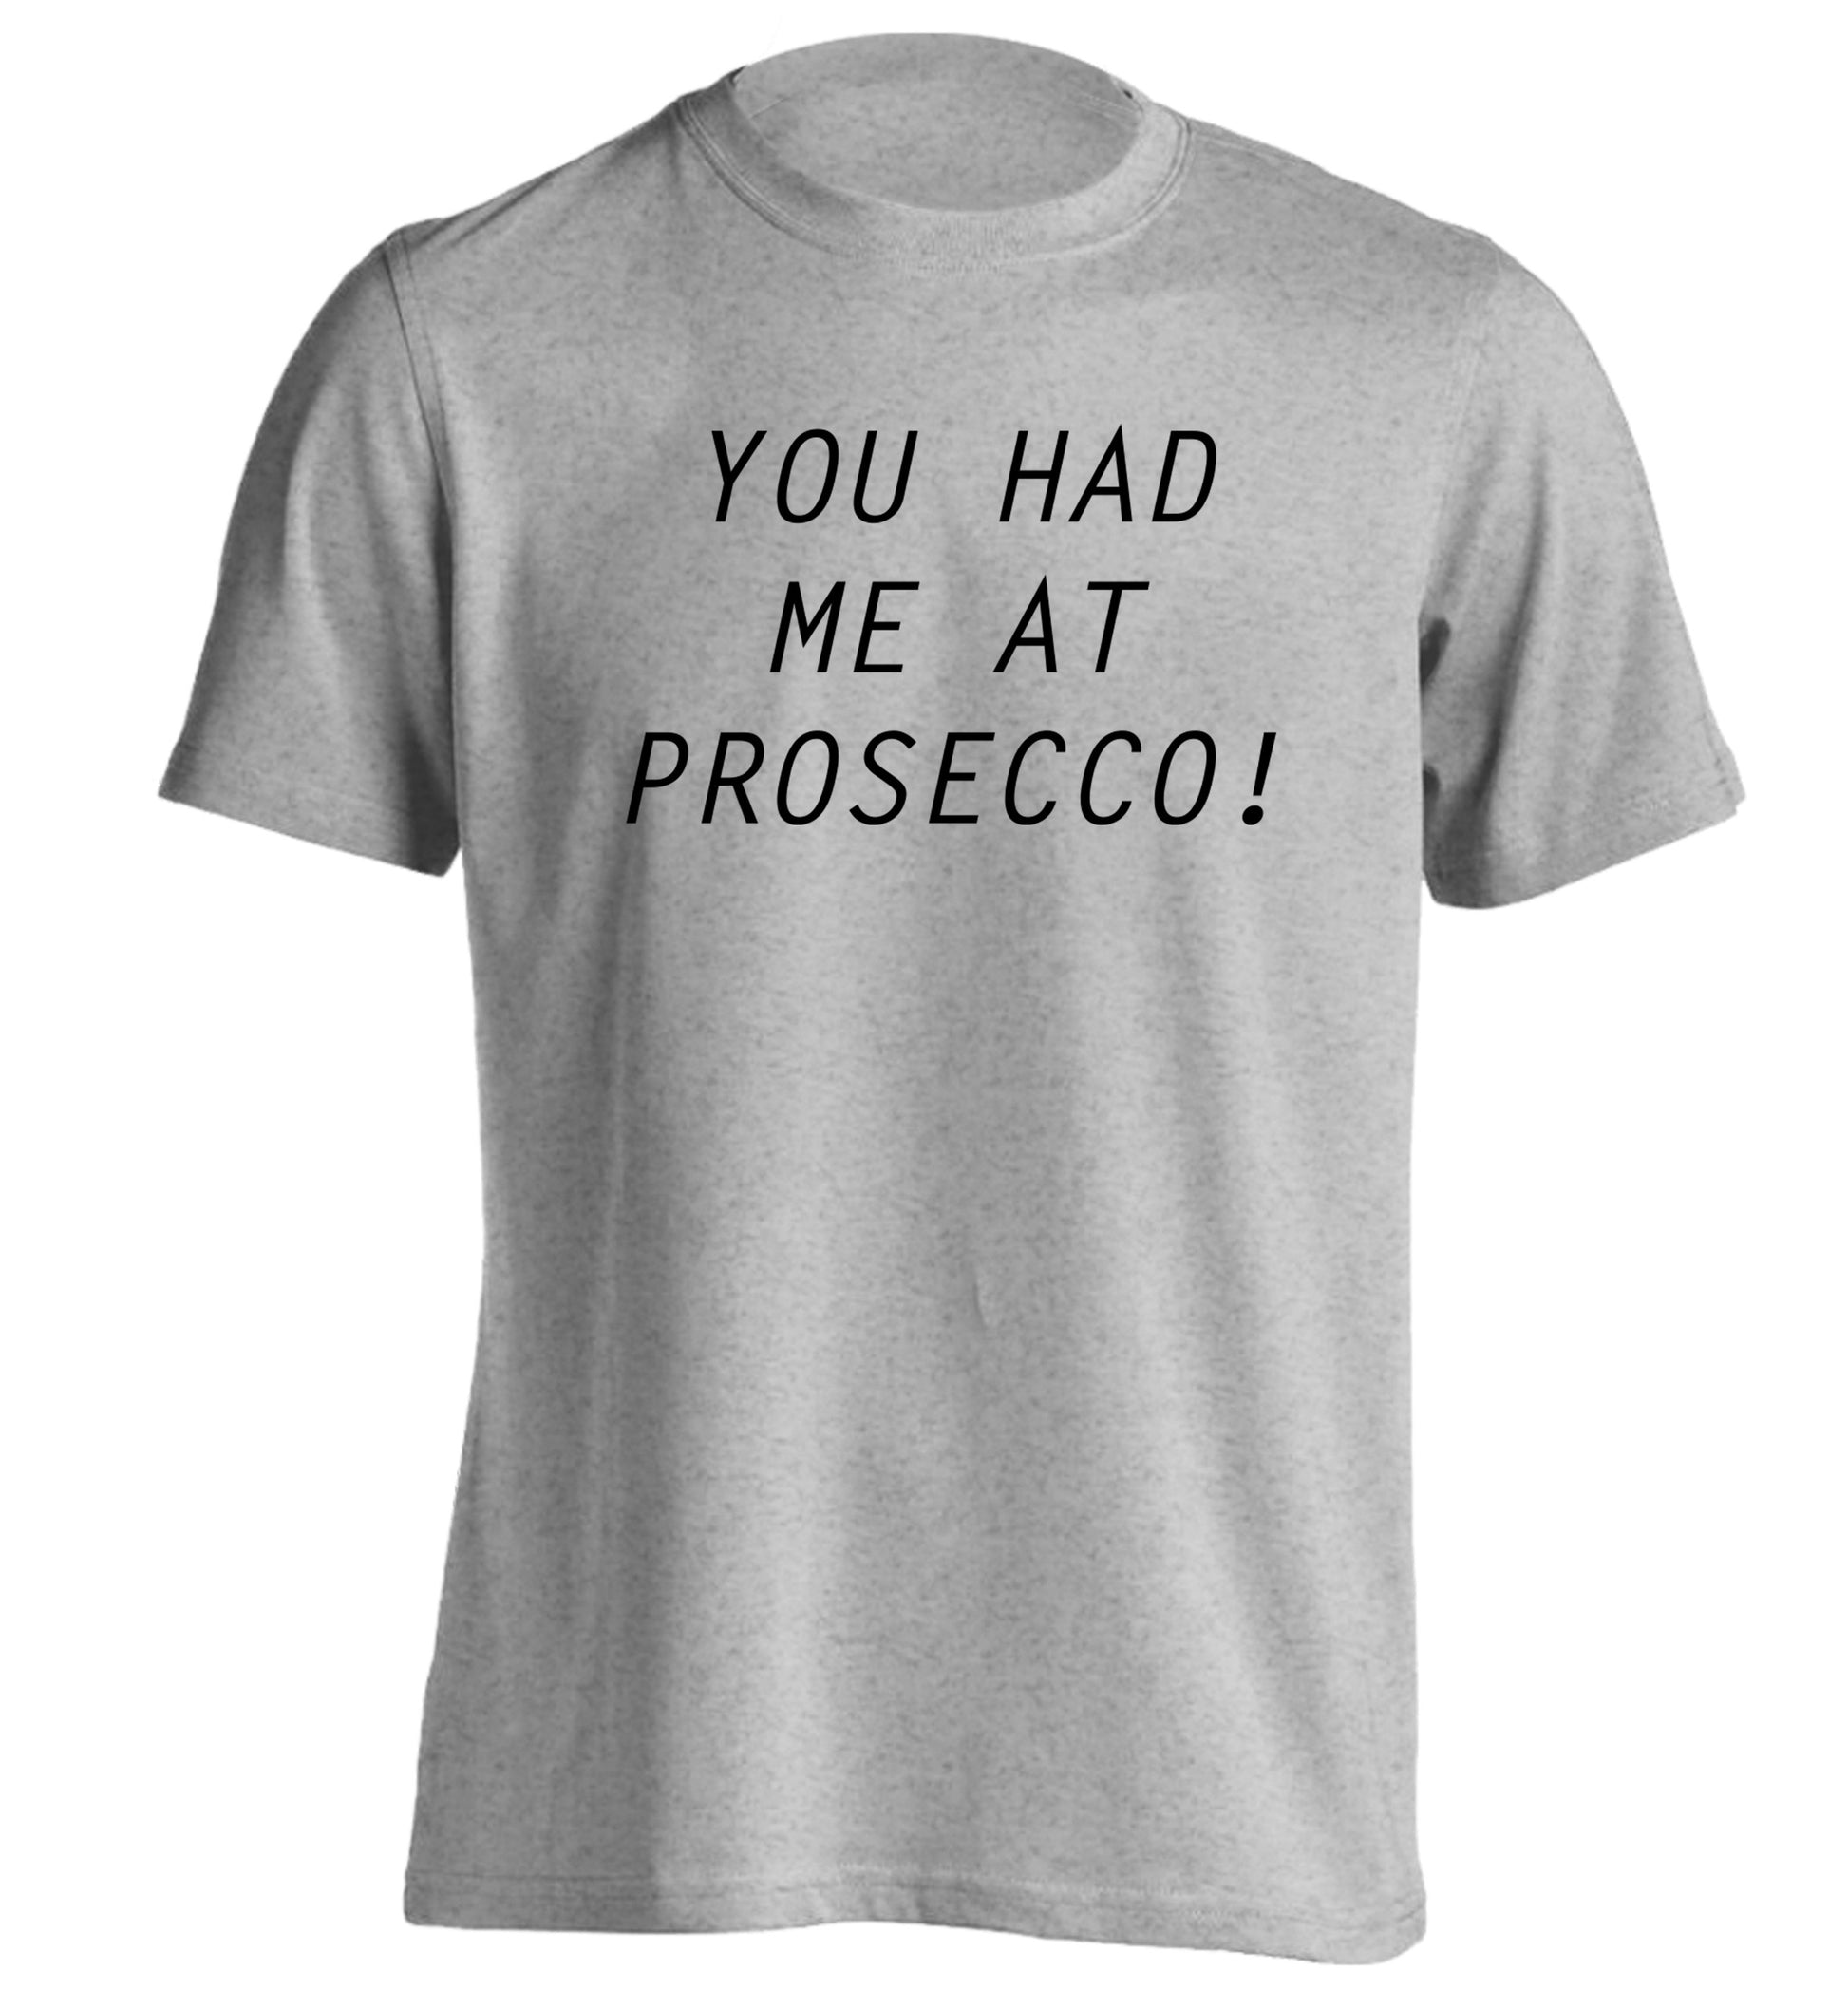 You had me at prosecco adults unisex grey Tshirt 2XL